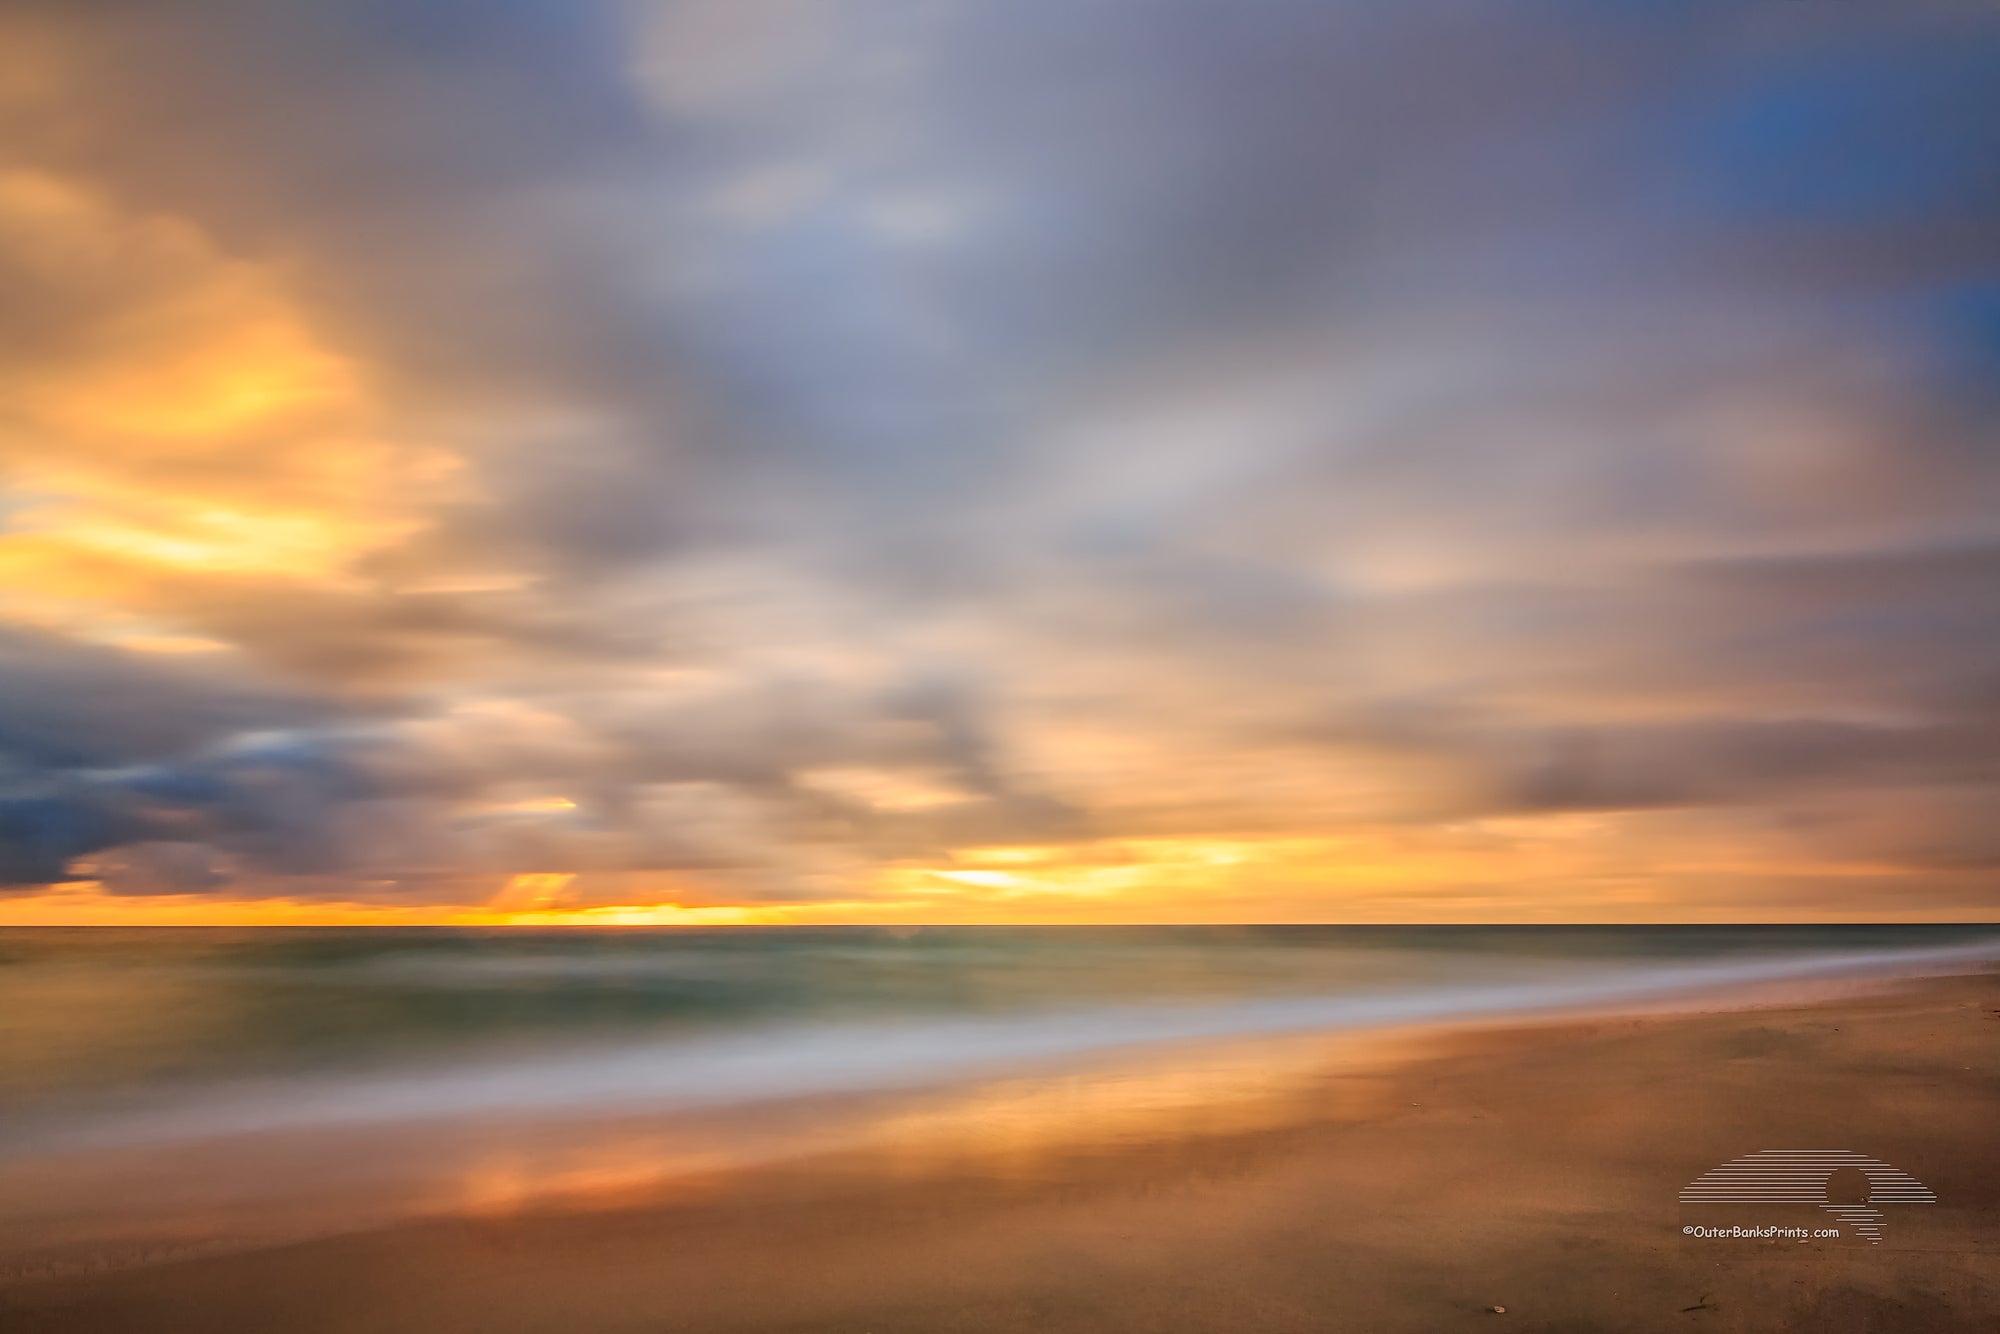 A one minute exposure of sunrise on a Kitty Hawk Beach on the Outer Banks, NC.